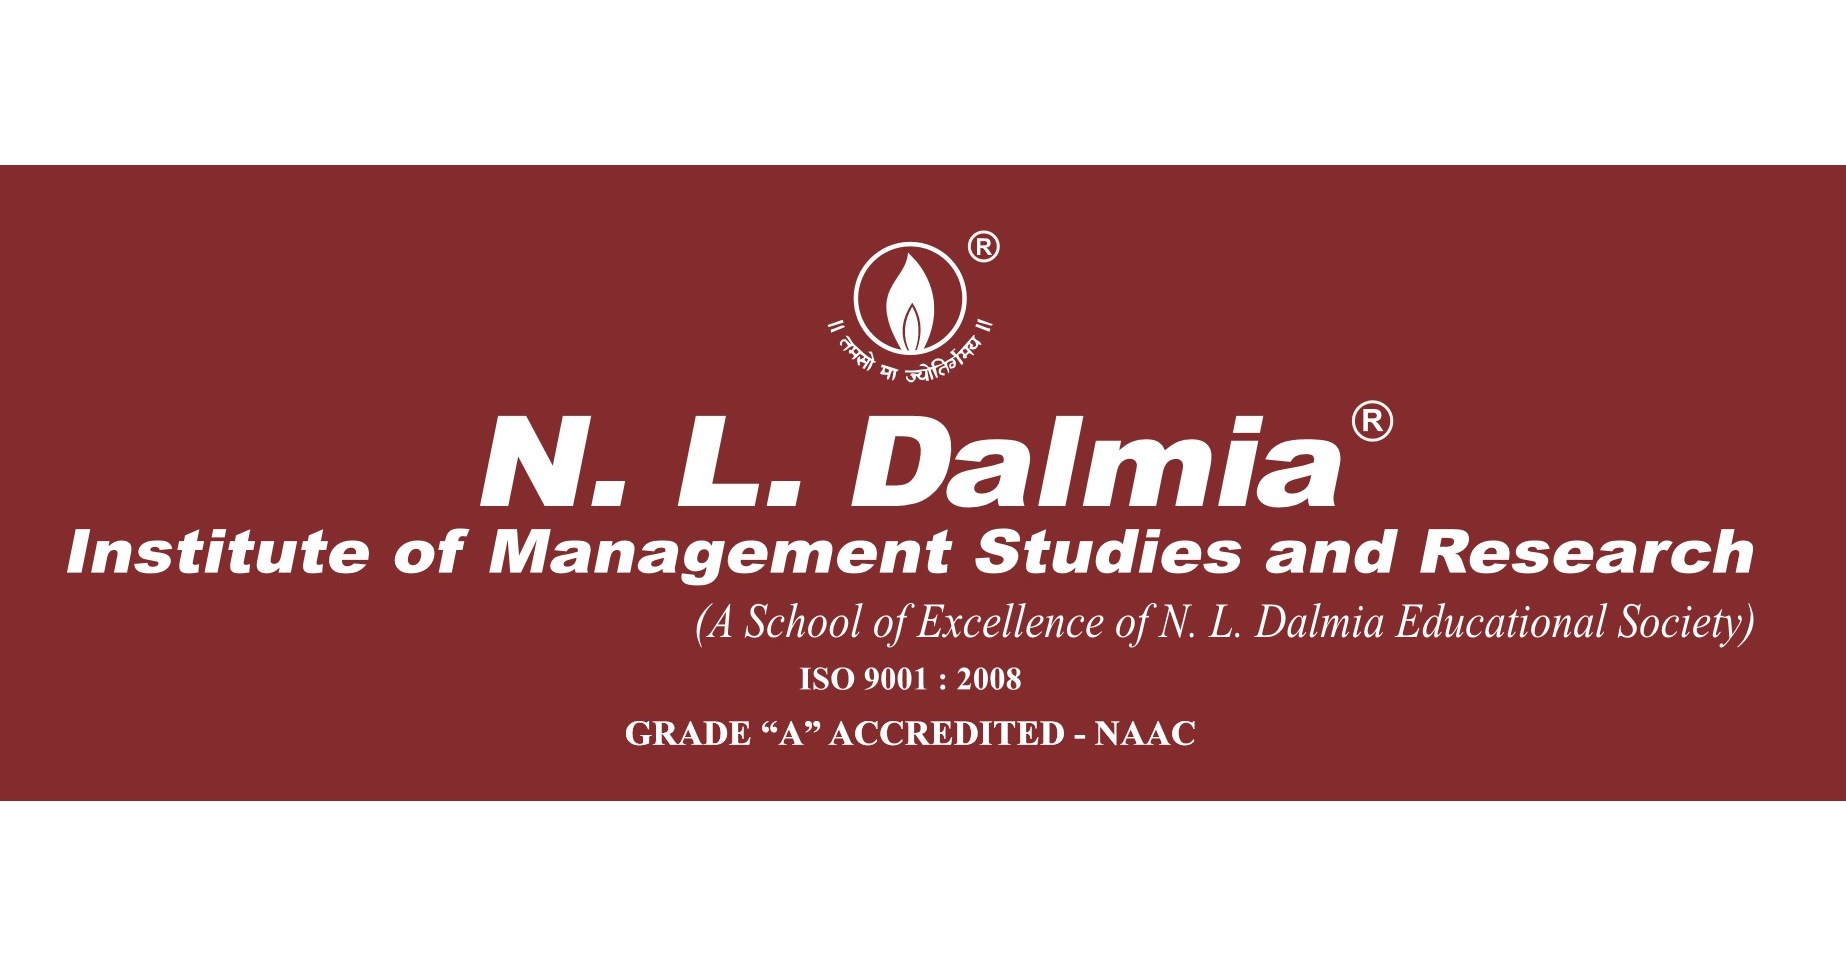 n-l-dalmia-institute-of-management-studies-and-research-all-set-to-launch-its-school-of